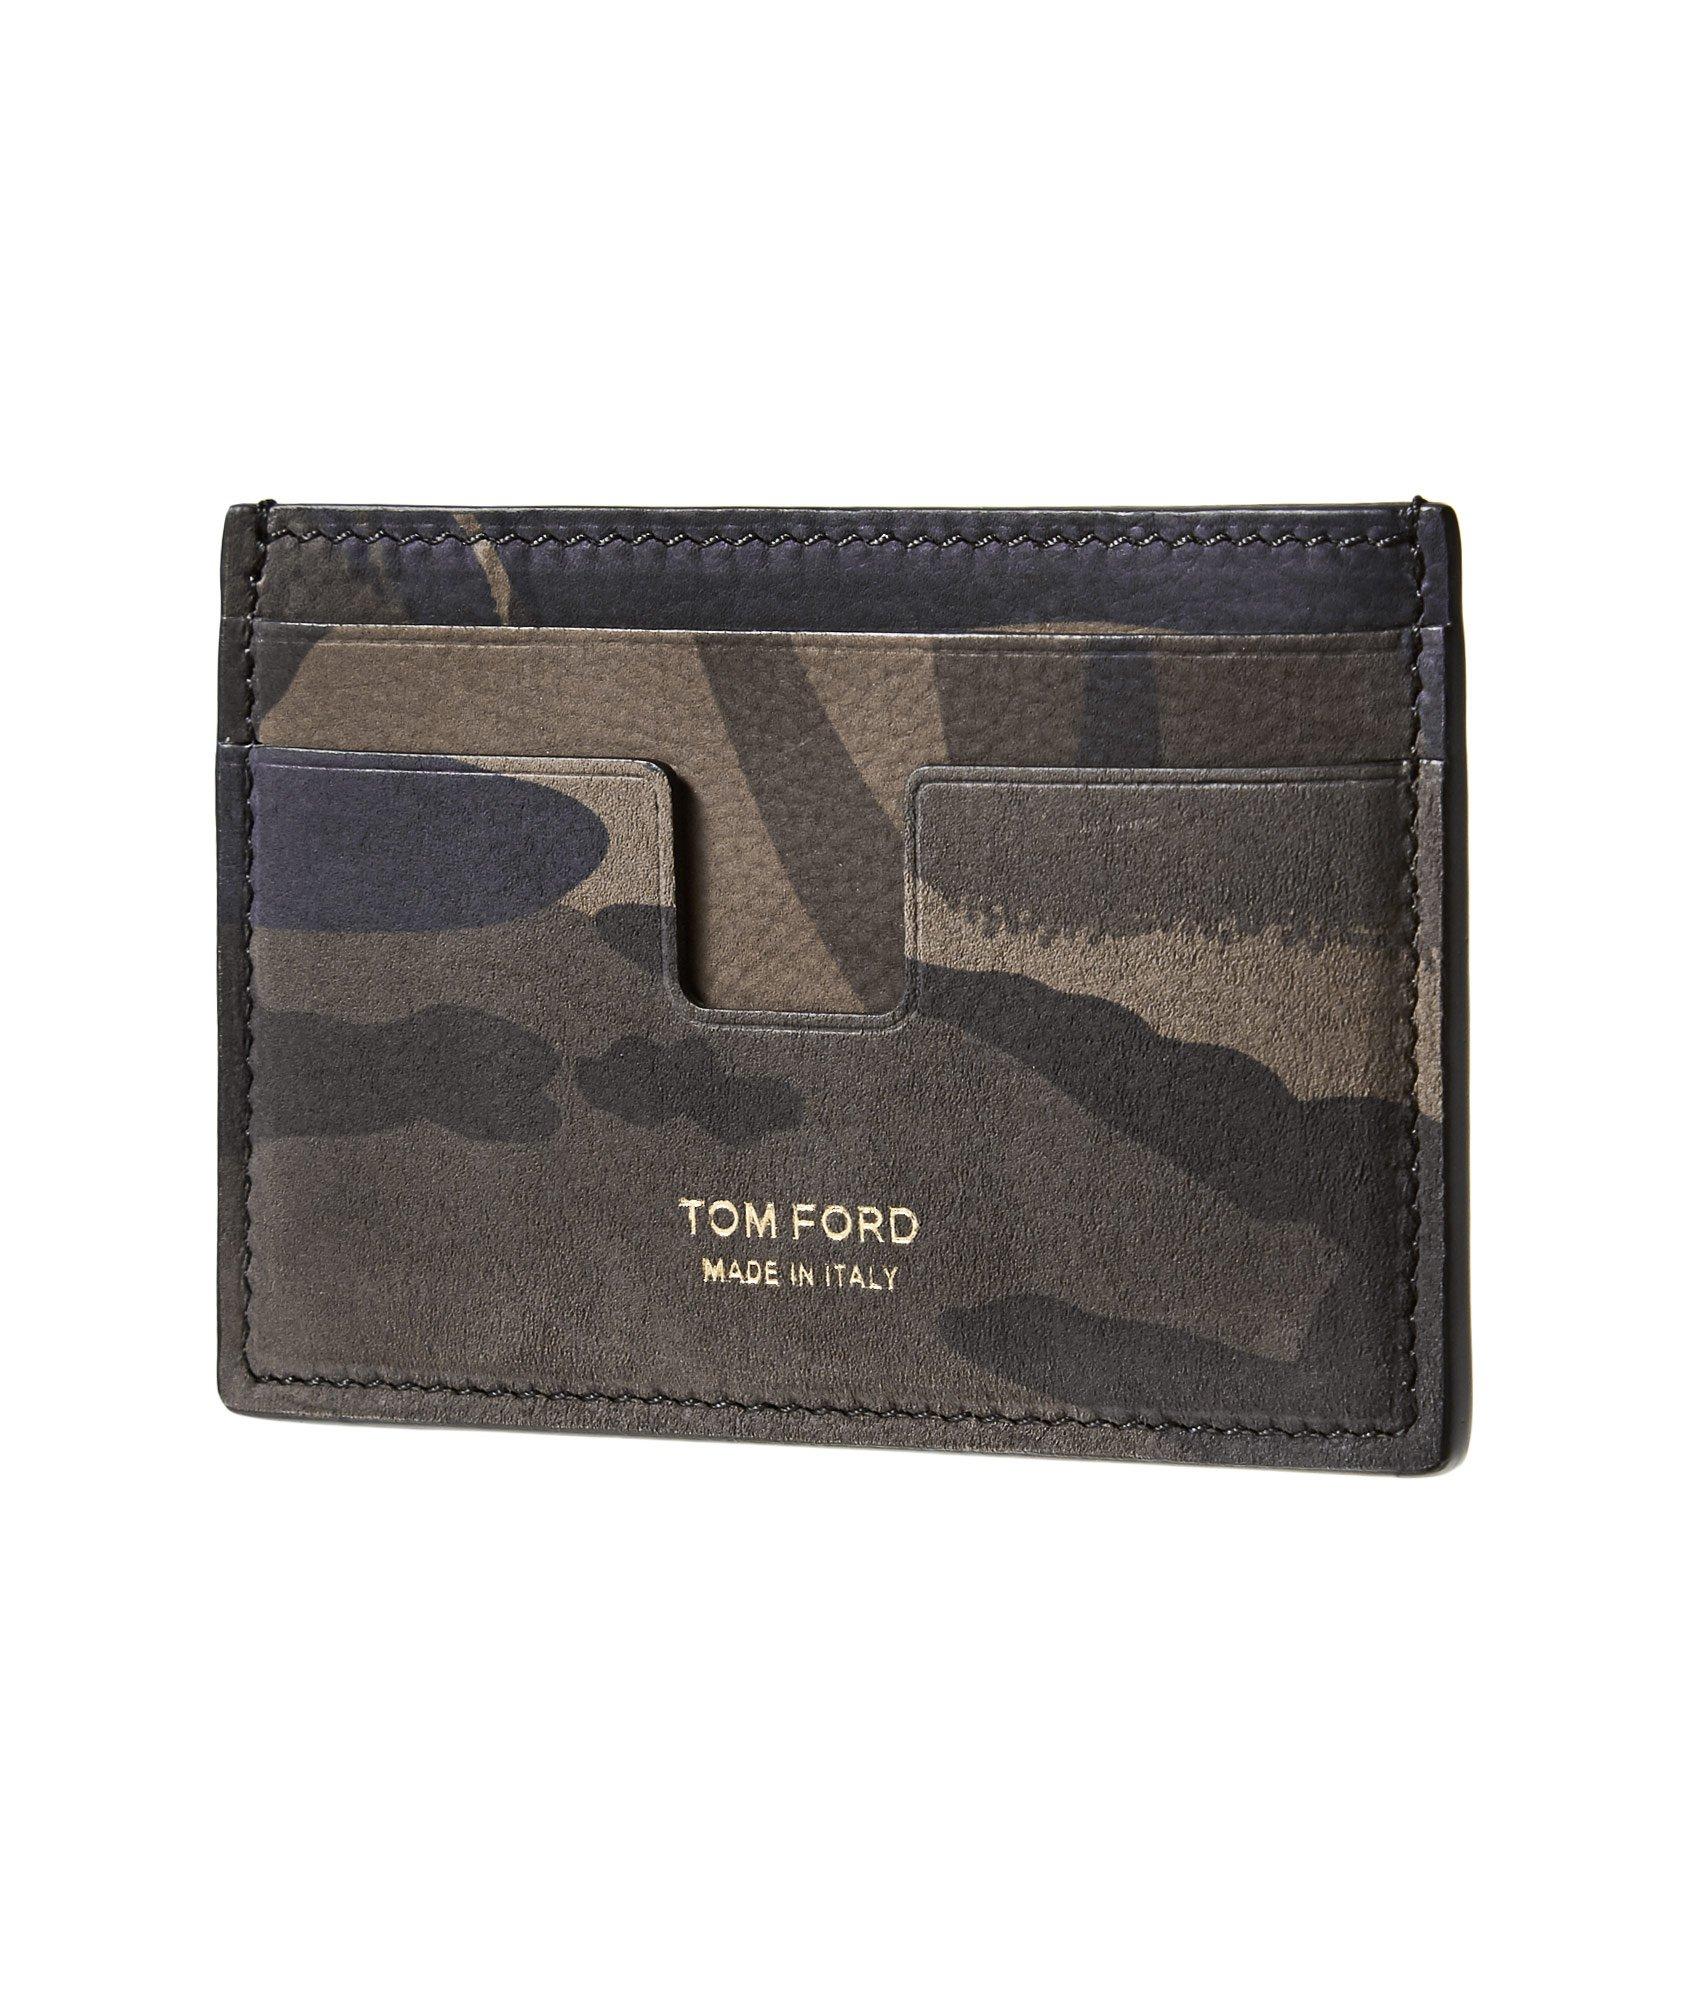 Camouflage Printed Leather Cardholder image 0